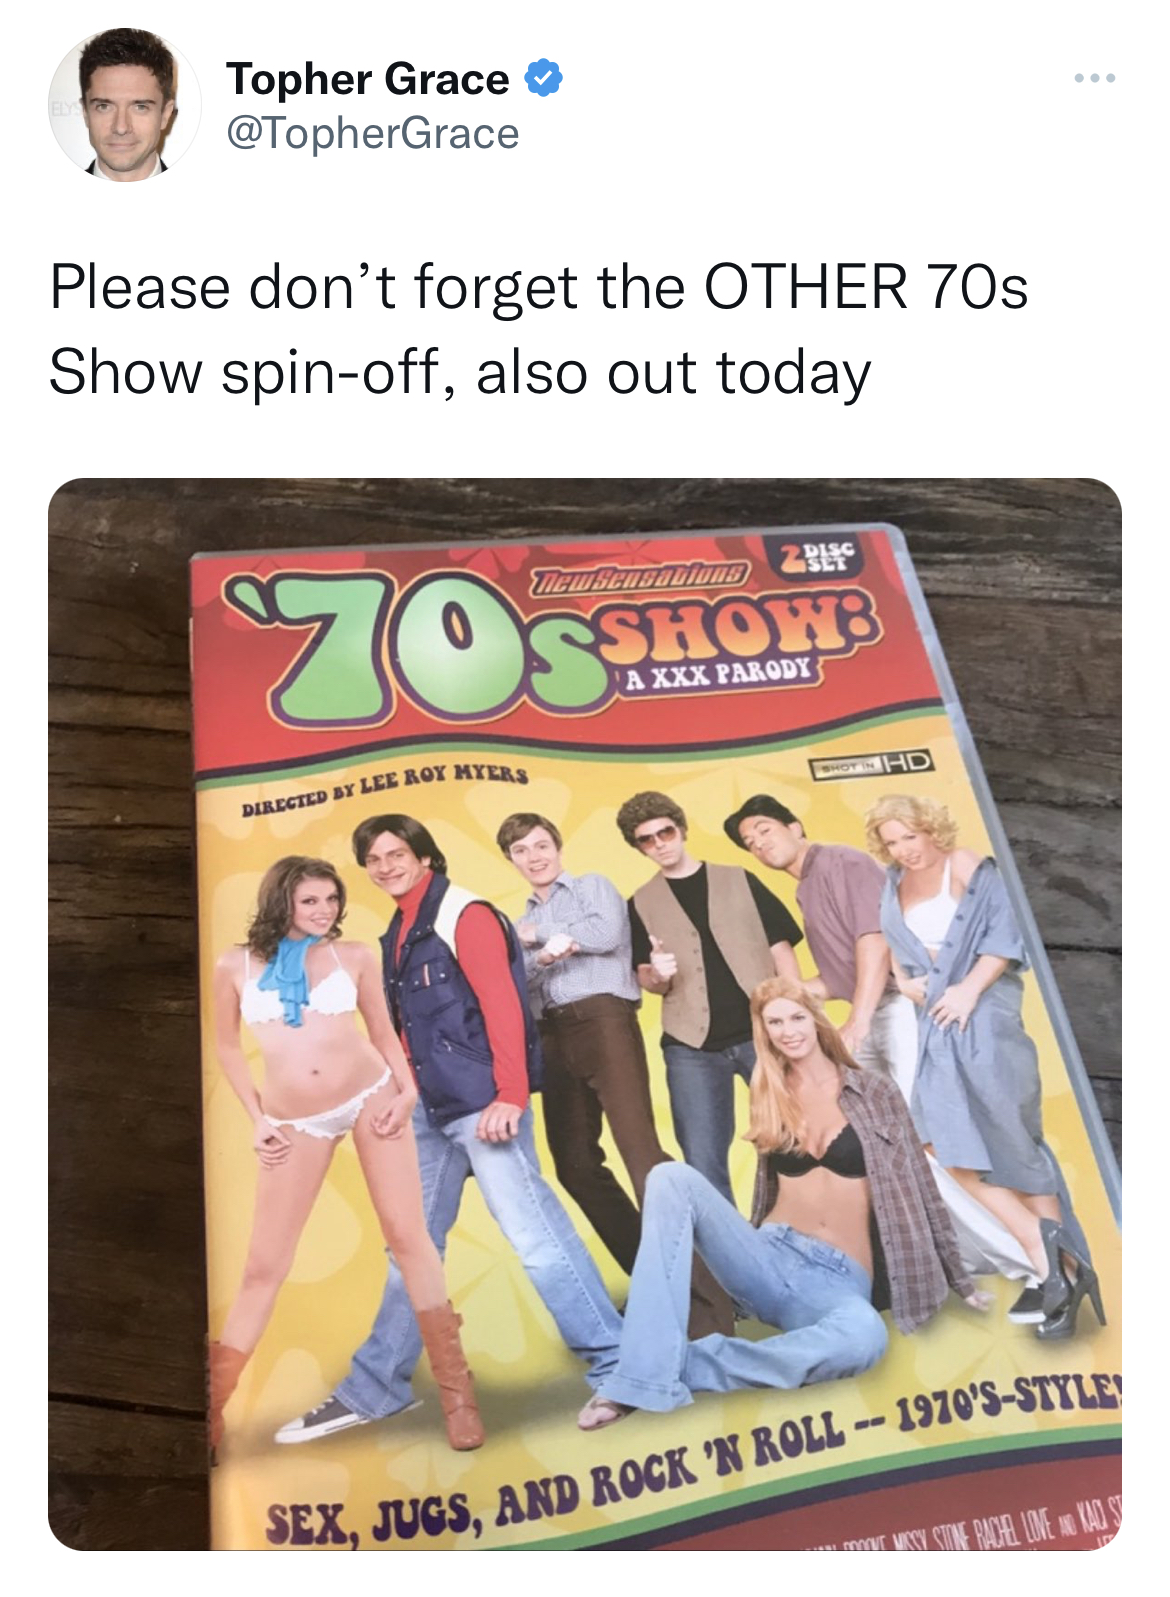 Tweets Dunking on Celebs - poster - Topher Grace Please don't forget the Other 70s Show spinoff, also out today Geanta 70S Directed By Lee Rotter Showb A Xxx Parody Sex, Jugs, And Rock'N Roll1970'SStyle